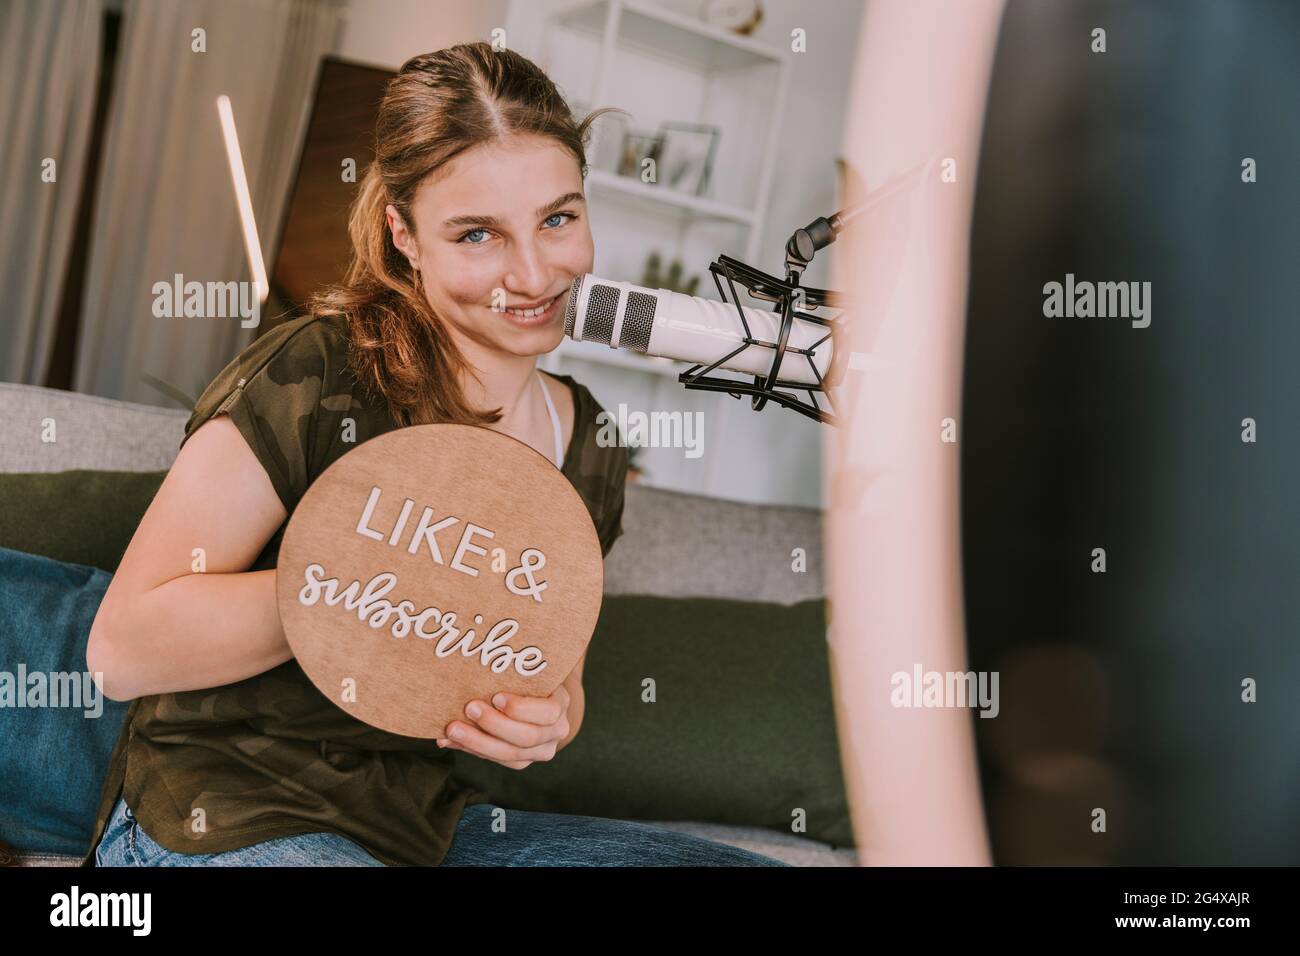 Smiling girl showing like and subscribe sign at home Stock Photo